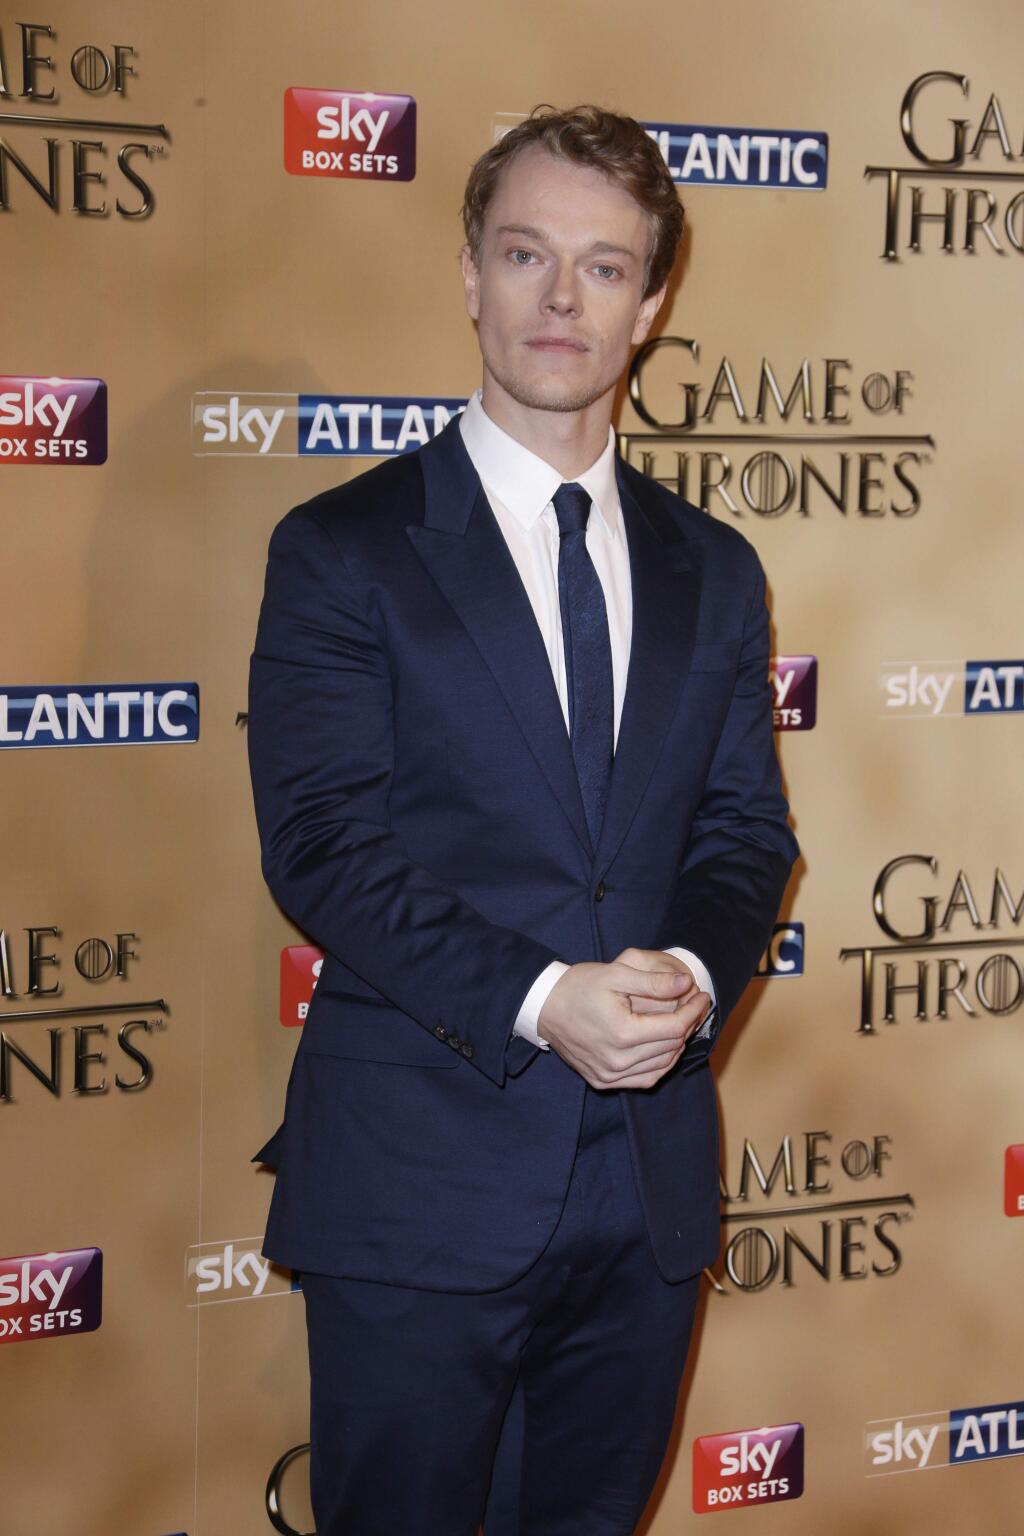 Alfie Allen poses for photographers upon arrival at the Tower of London for the world premiere of Game of Thrones, season 5, in London Wednesday, March 18, 2015. (Photo by Joel Ryan/Invision/AP)